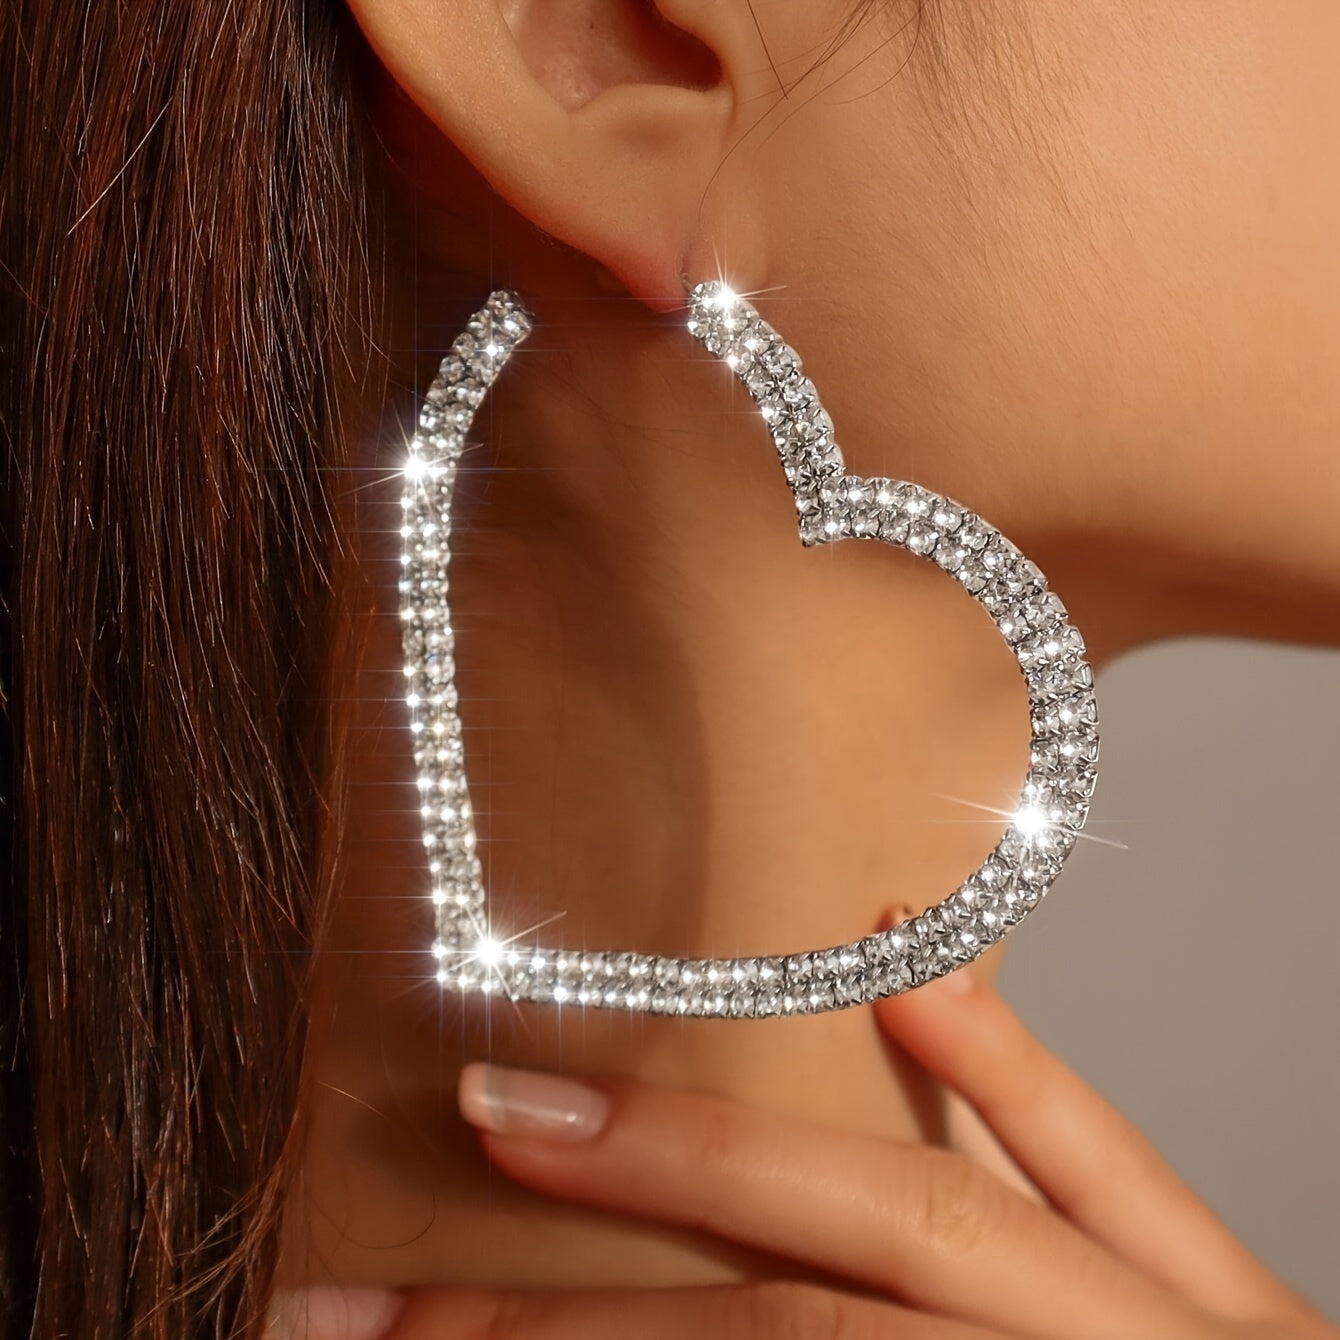 Make a Statement with Exaggerated Big Heart Rhinestone Hoop Earrings - Perfect Jewelry Gift for Women and Girls